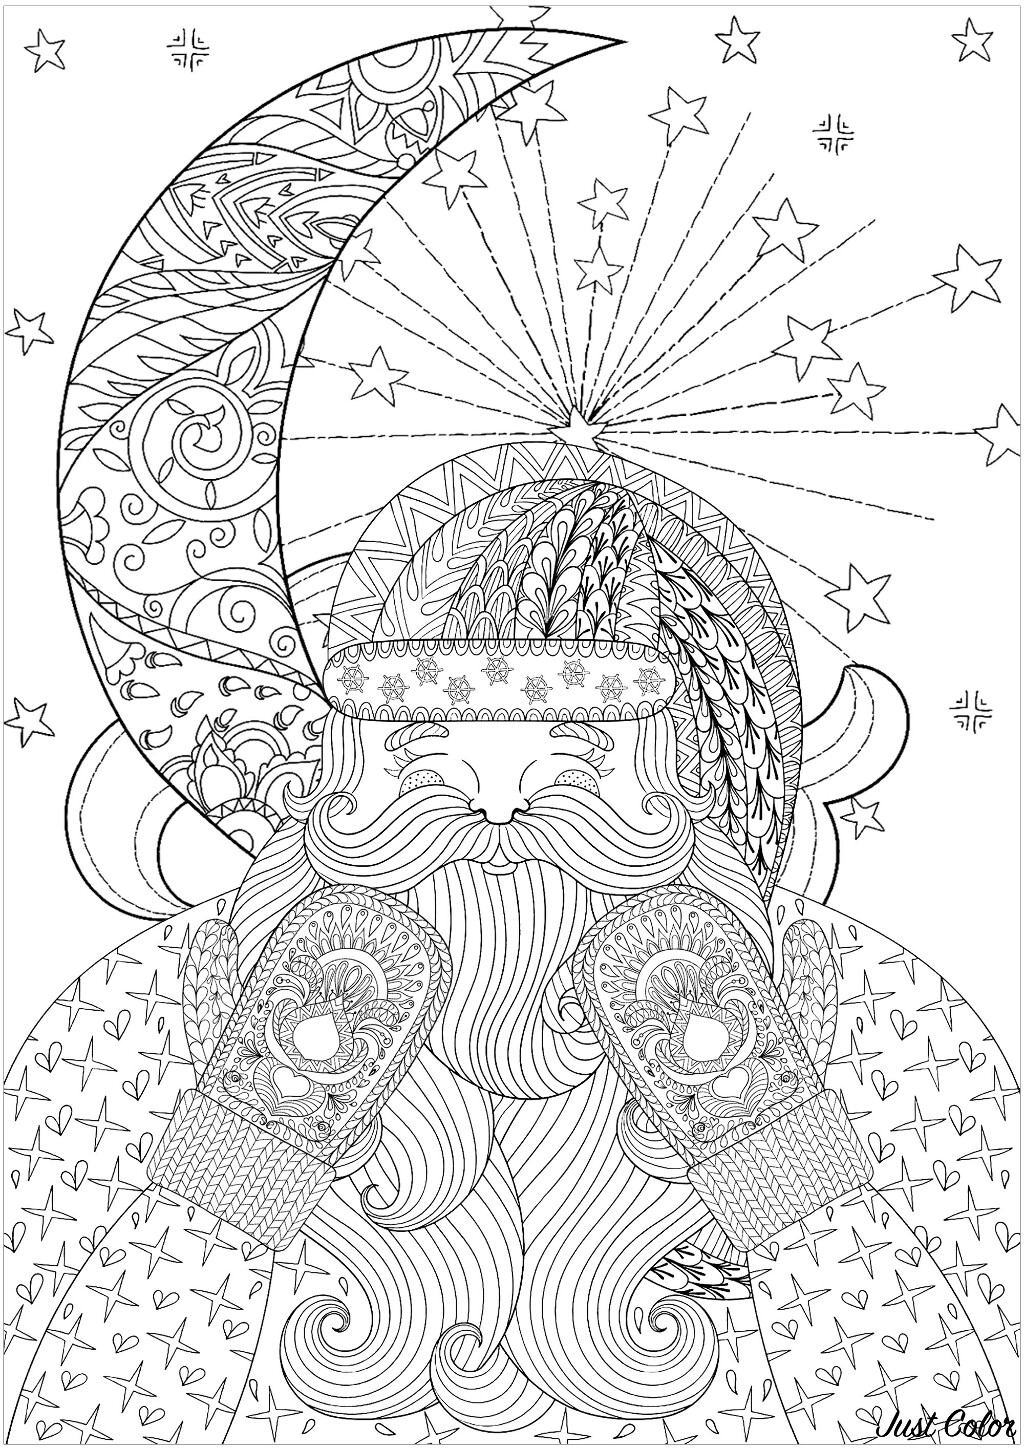 Happy Santa with knitted mittens. You can also color this beautiful moon and stars in background